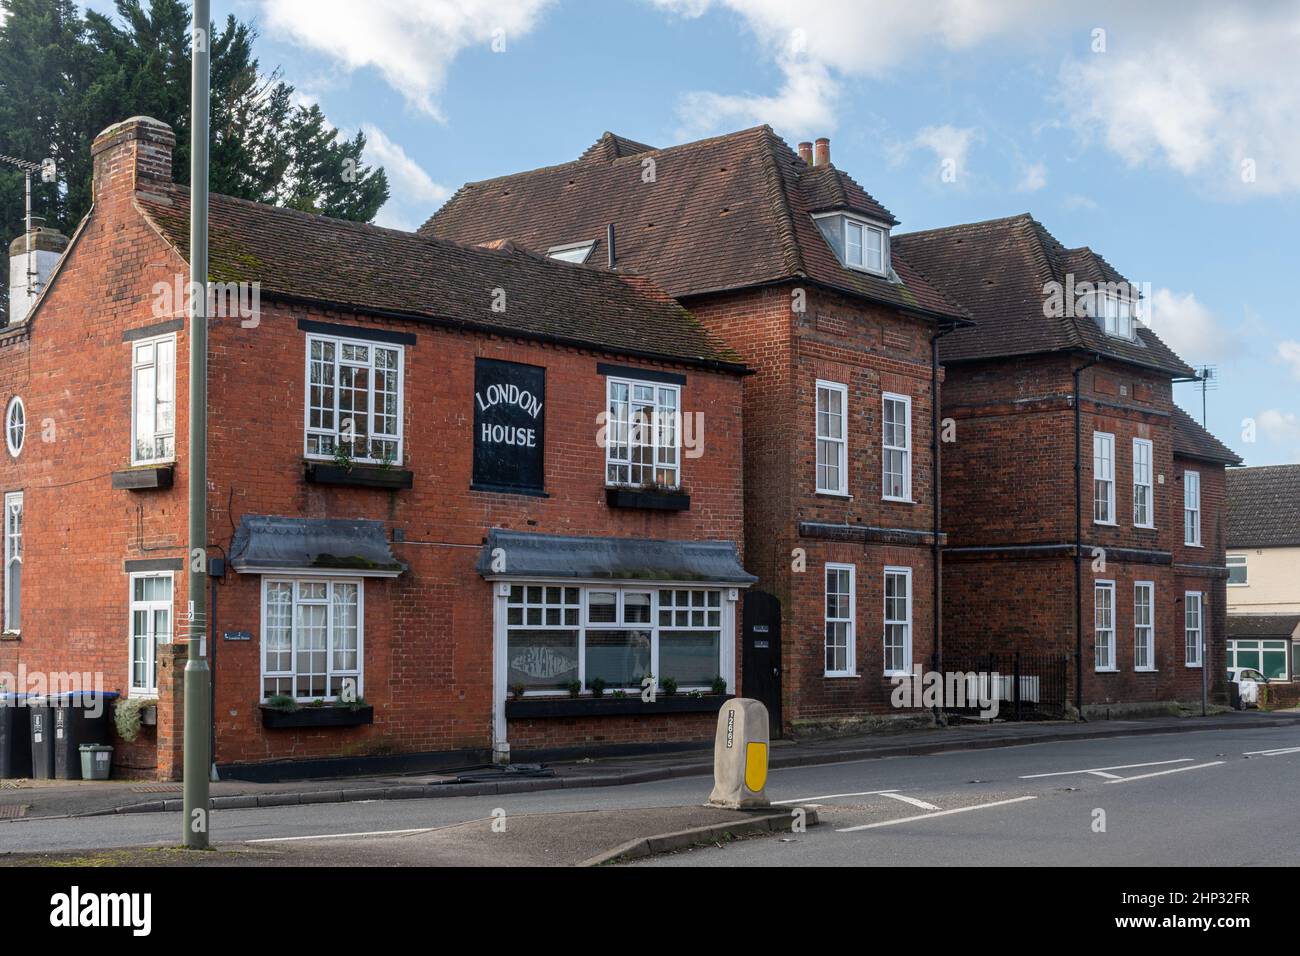 View of London House, a former pub and restaurant on High Street in Old Woking village, Surrey, England, UK Stock Photo